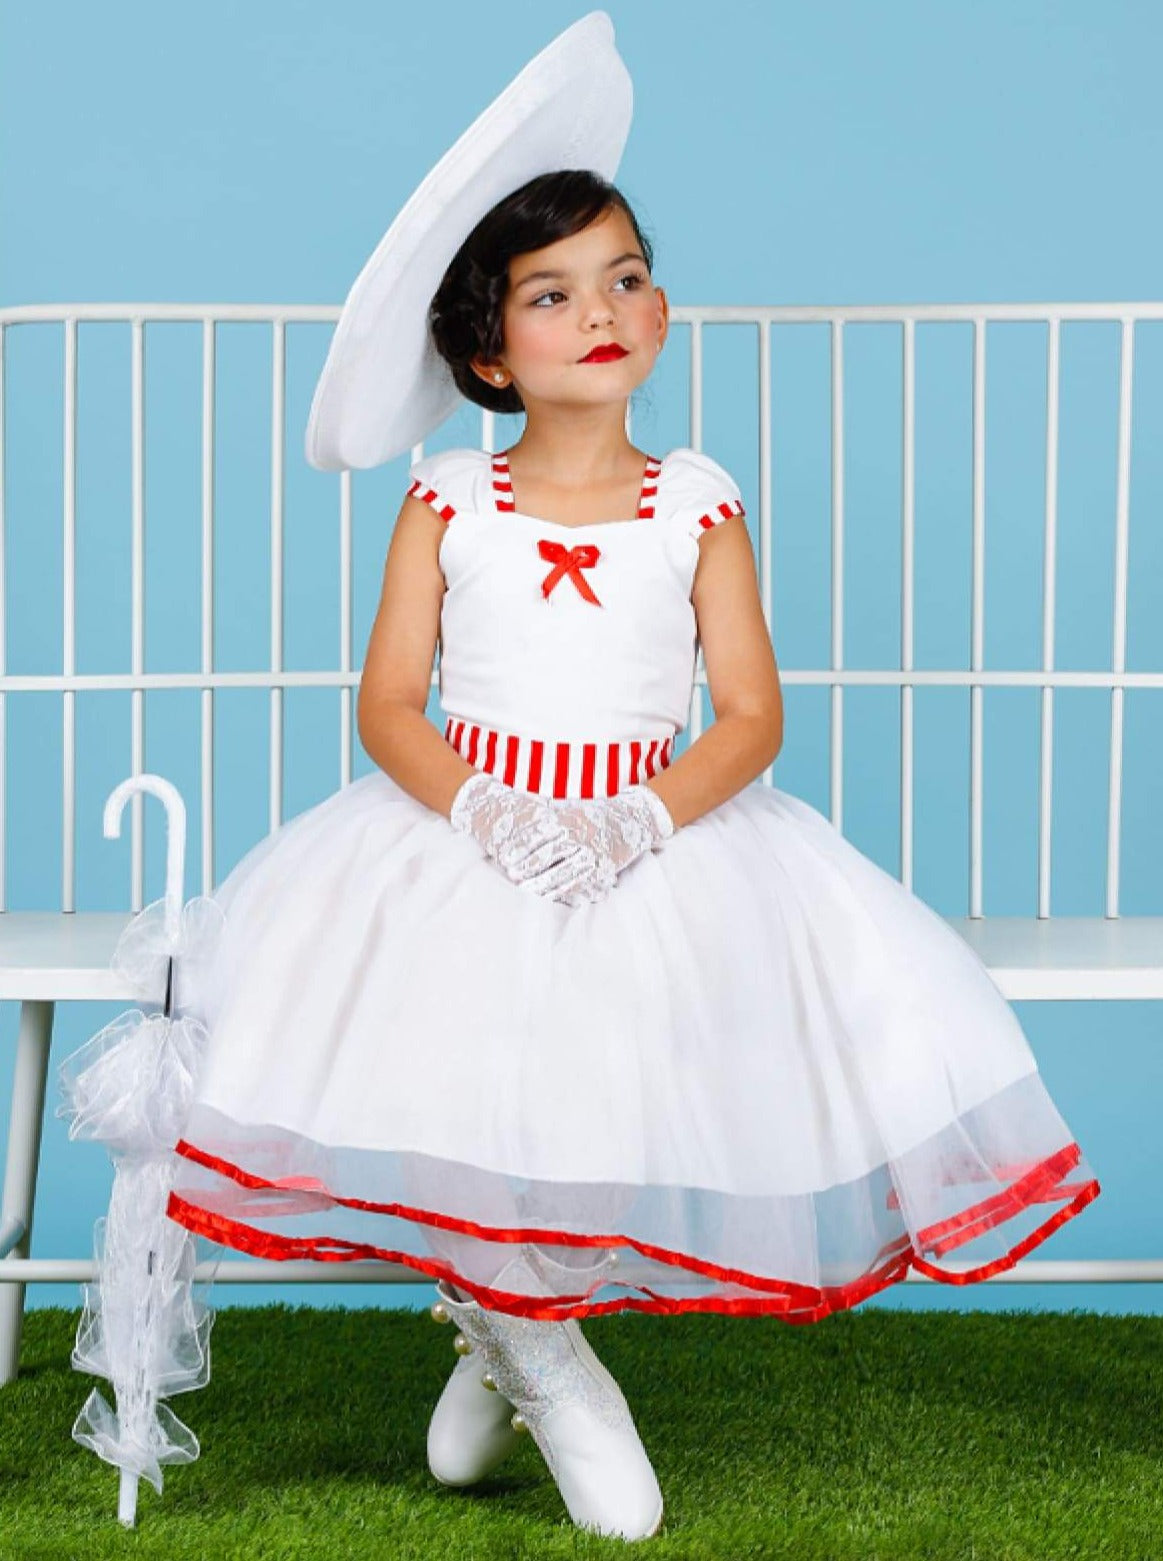 Girls Mary Poppins Inspired Striped Halloween Costume with Lace Gloves - Girls Halloween Costume